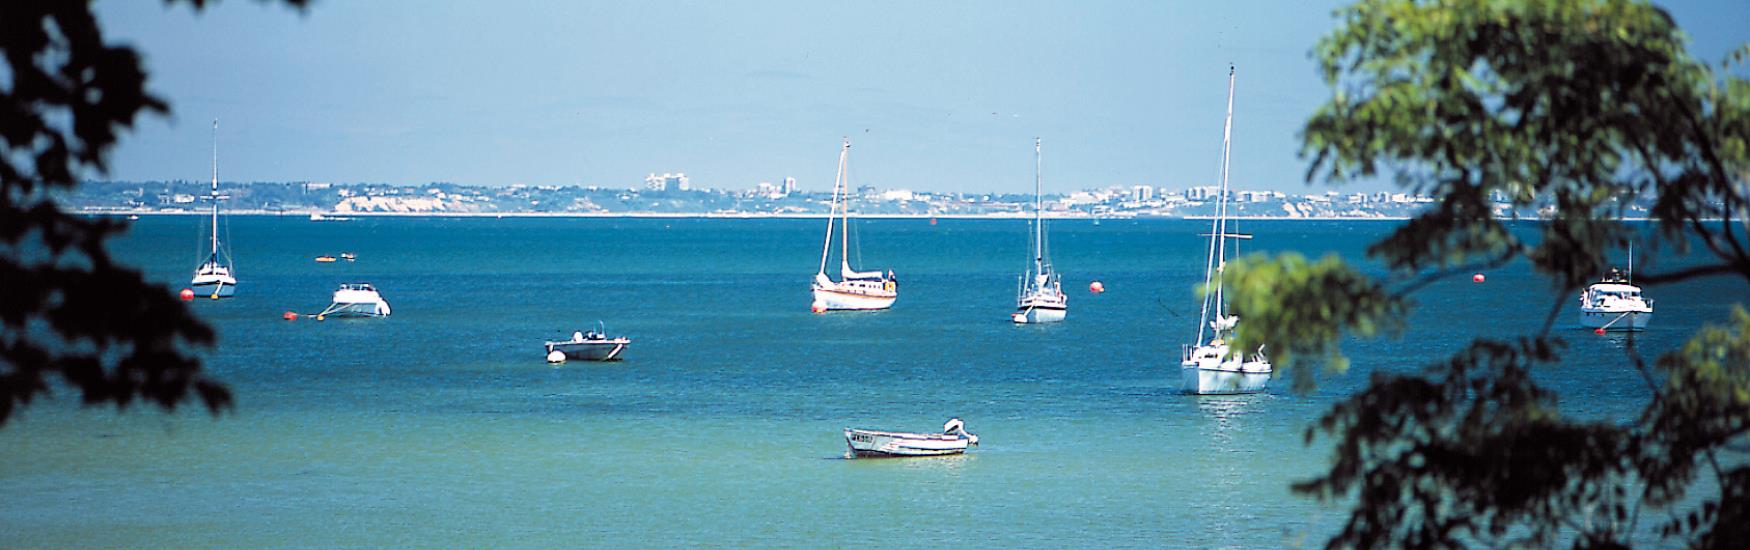 Boats moored near studland with Bournemouth and Pooles coast in the background